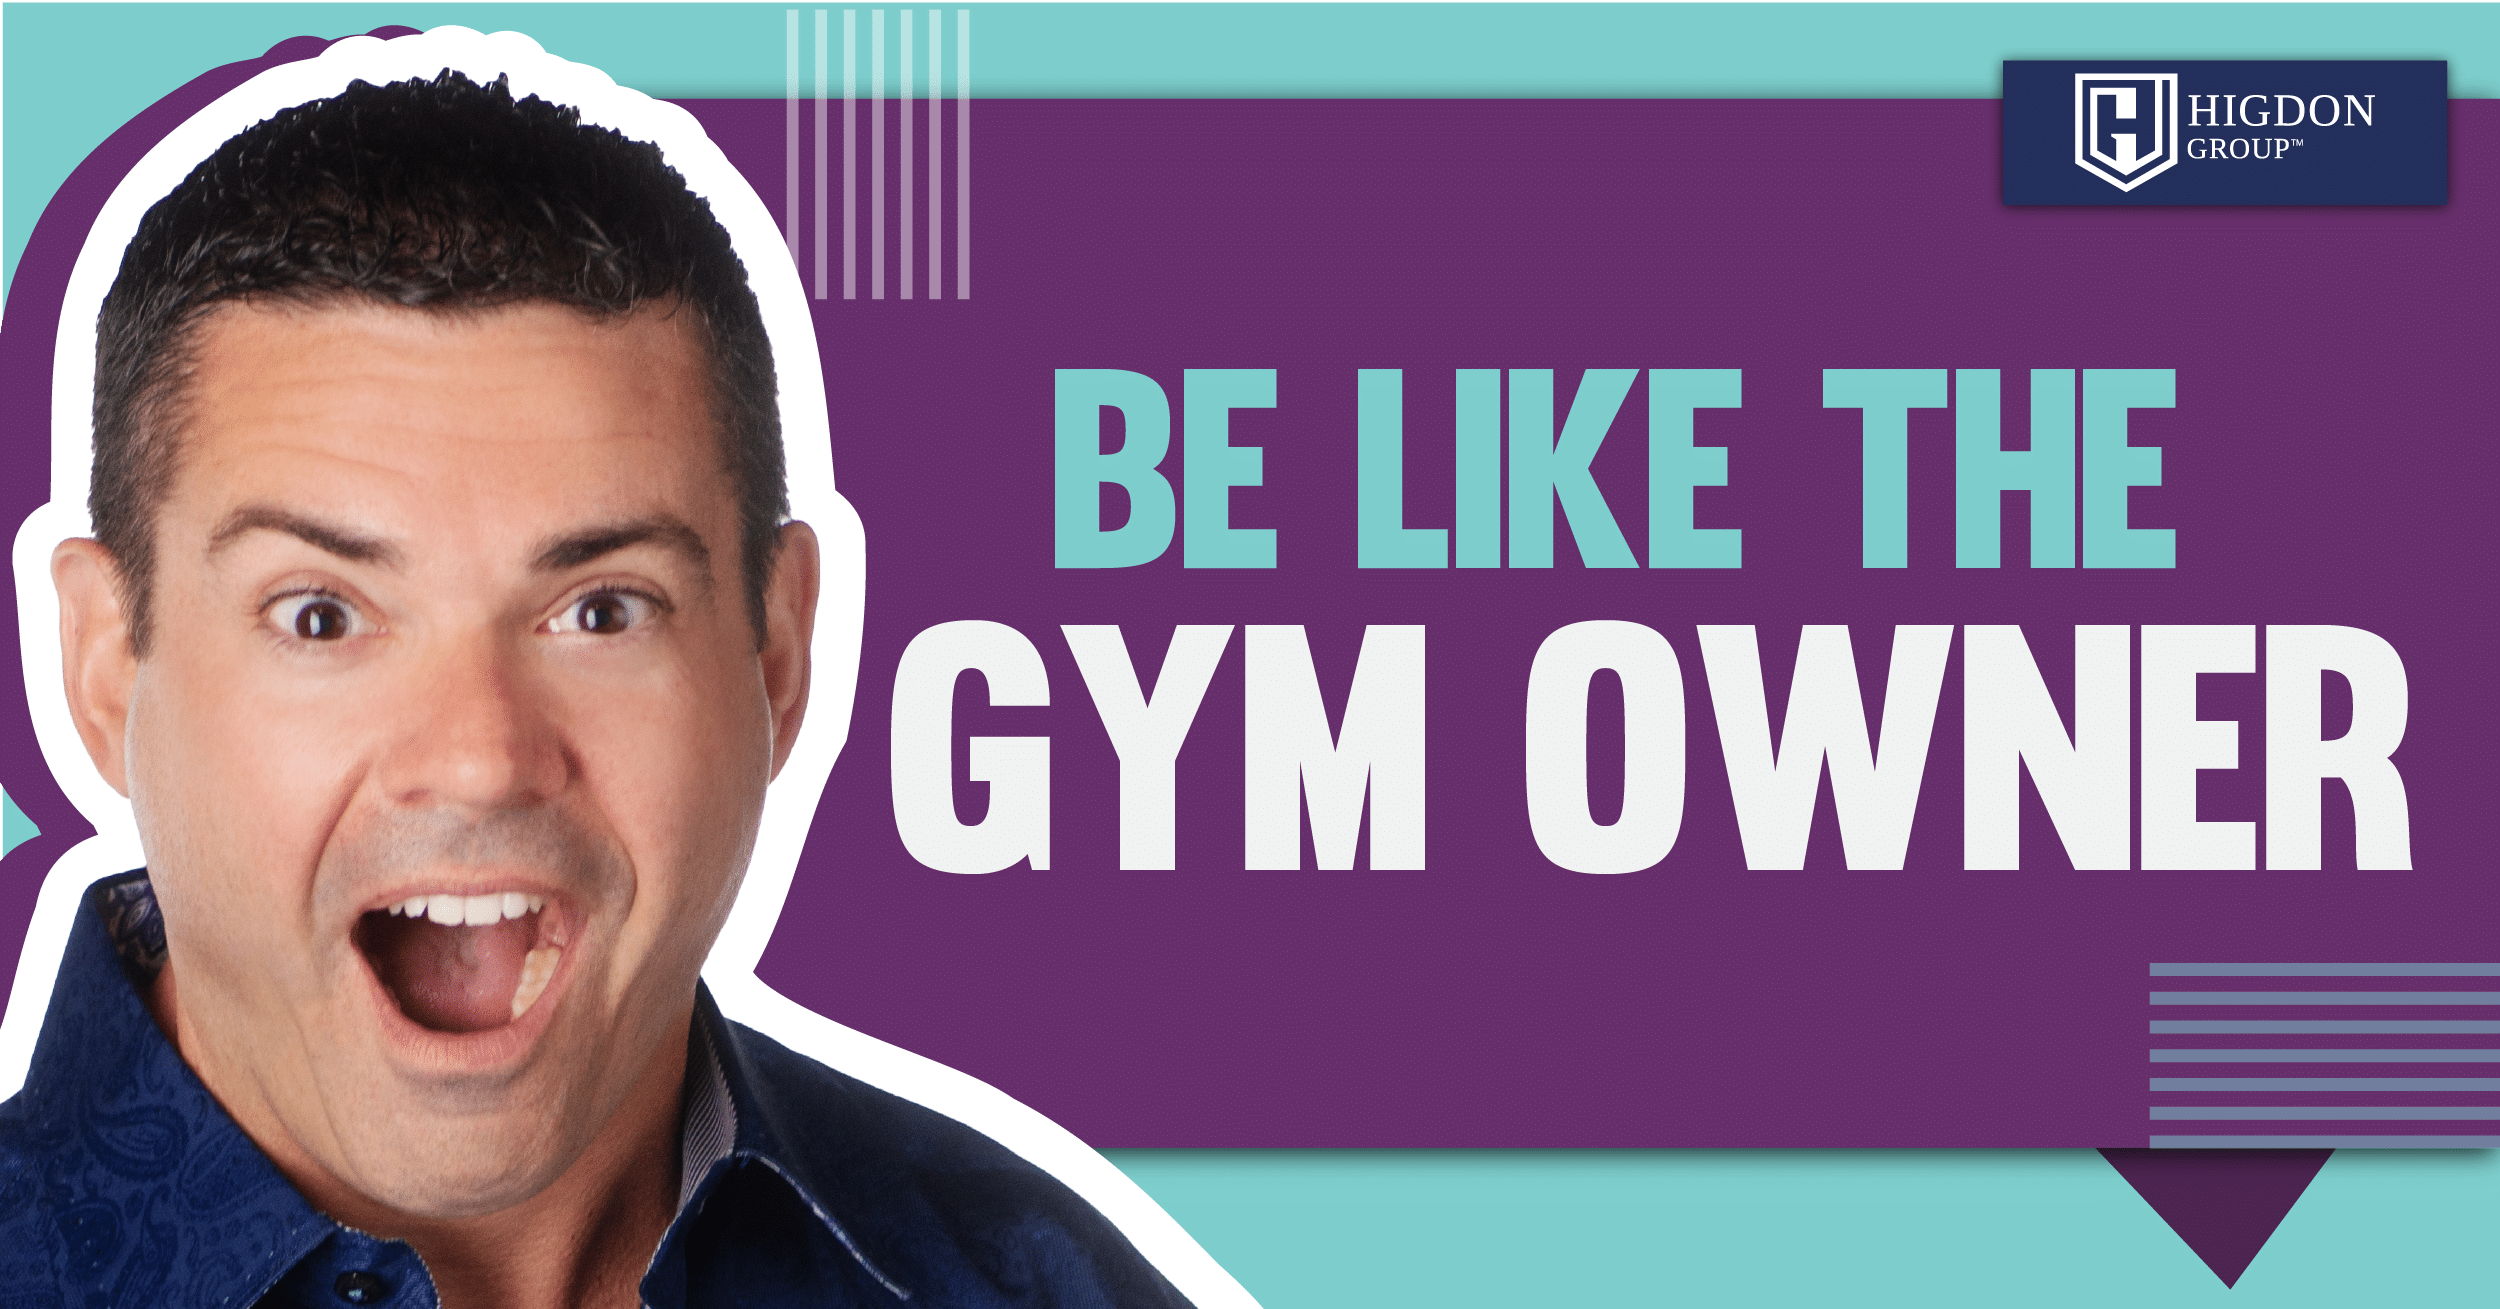 Offer Value to Customers – Be Like The Gym Owner